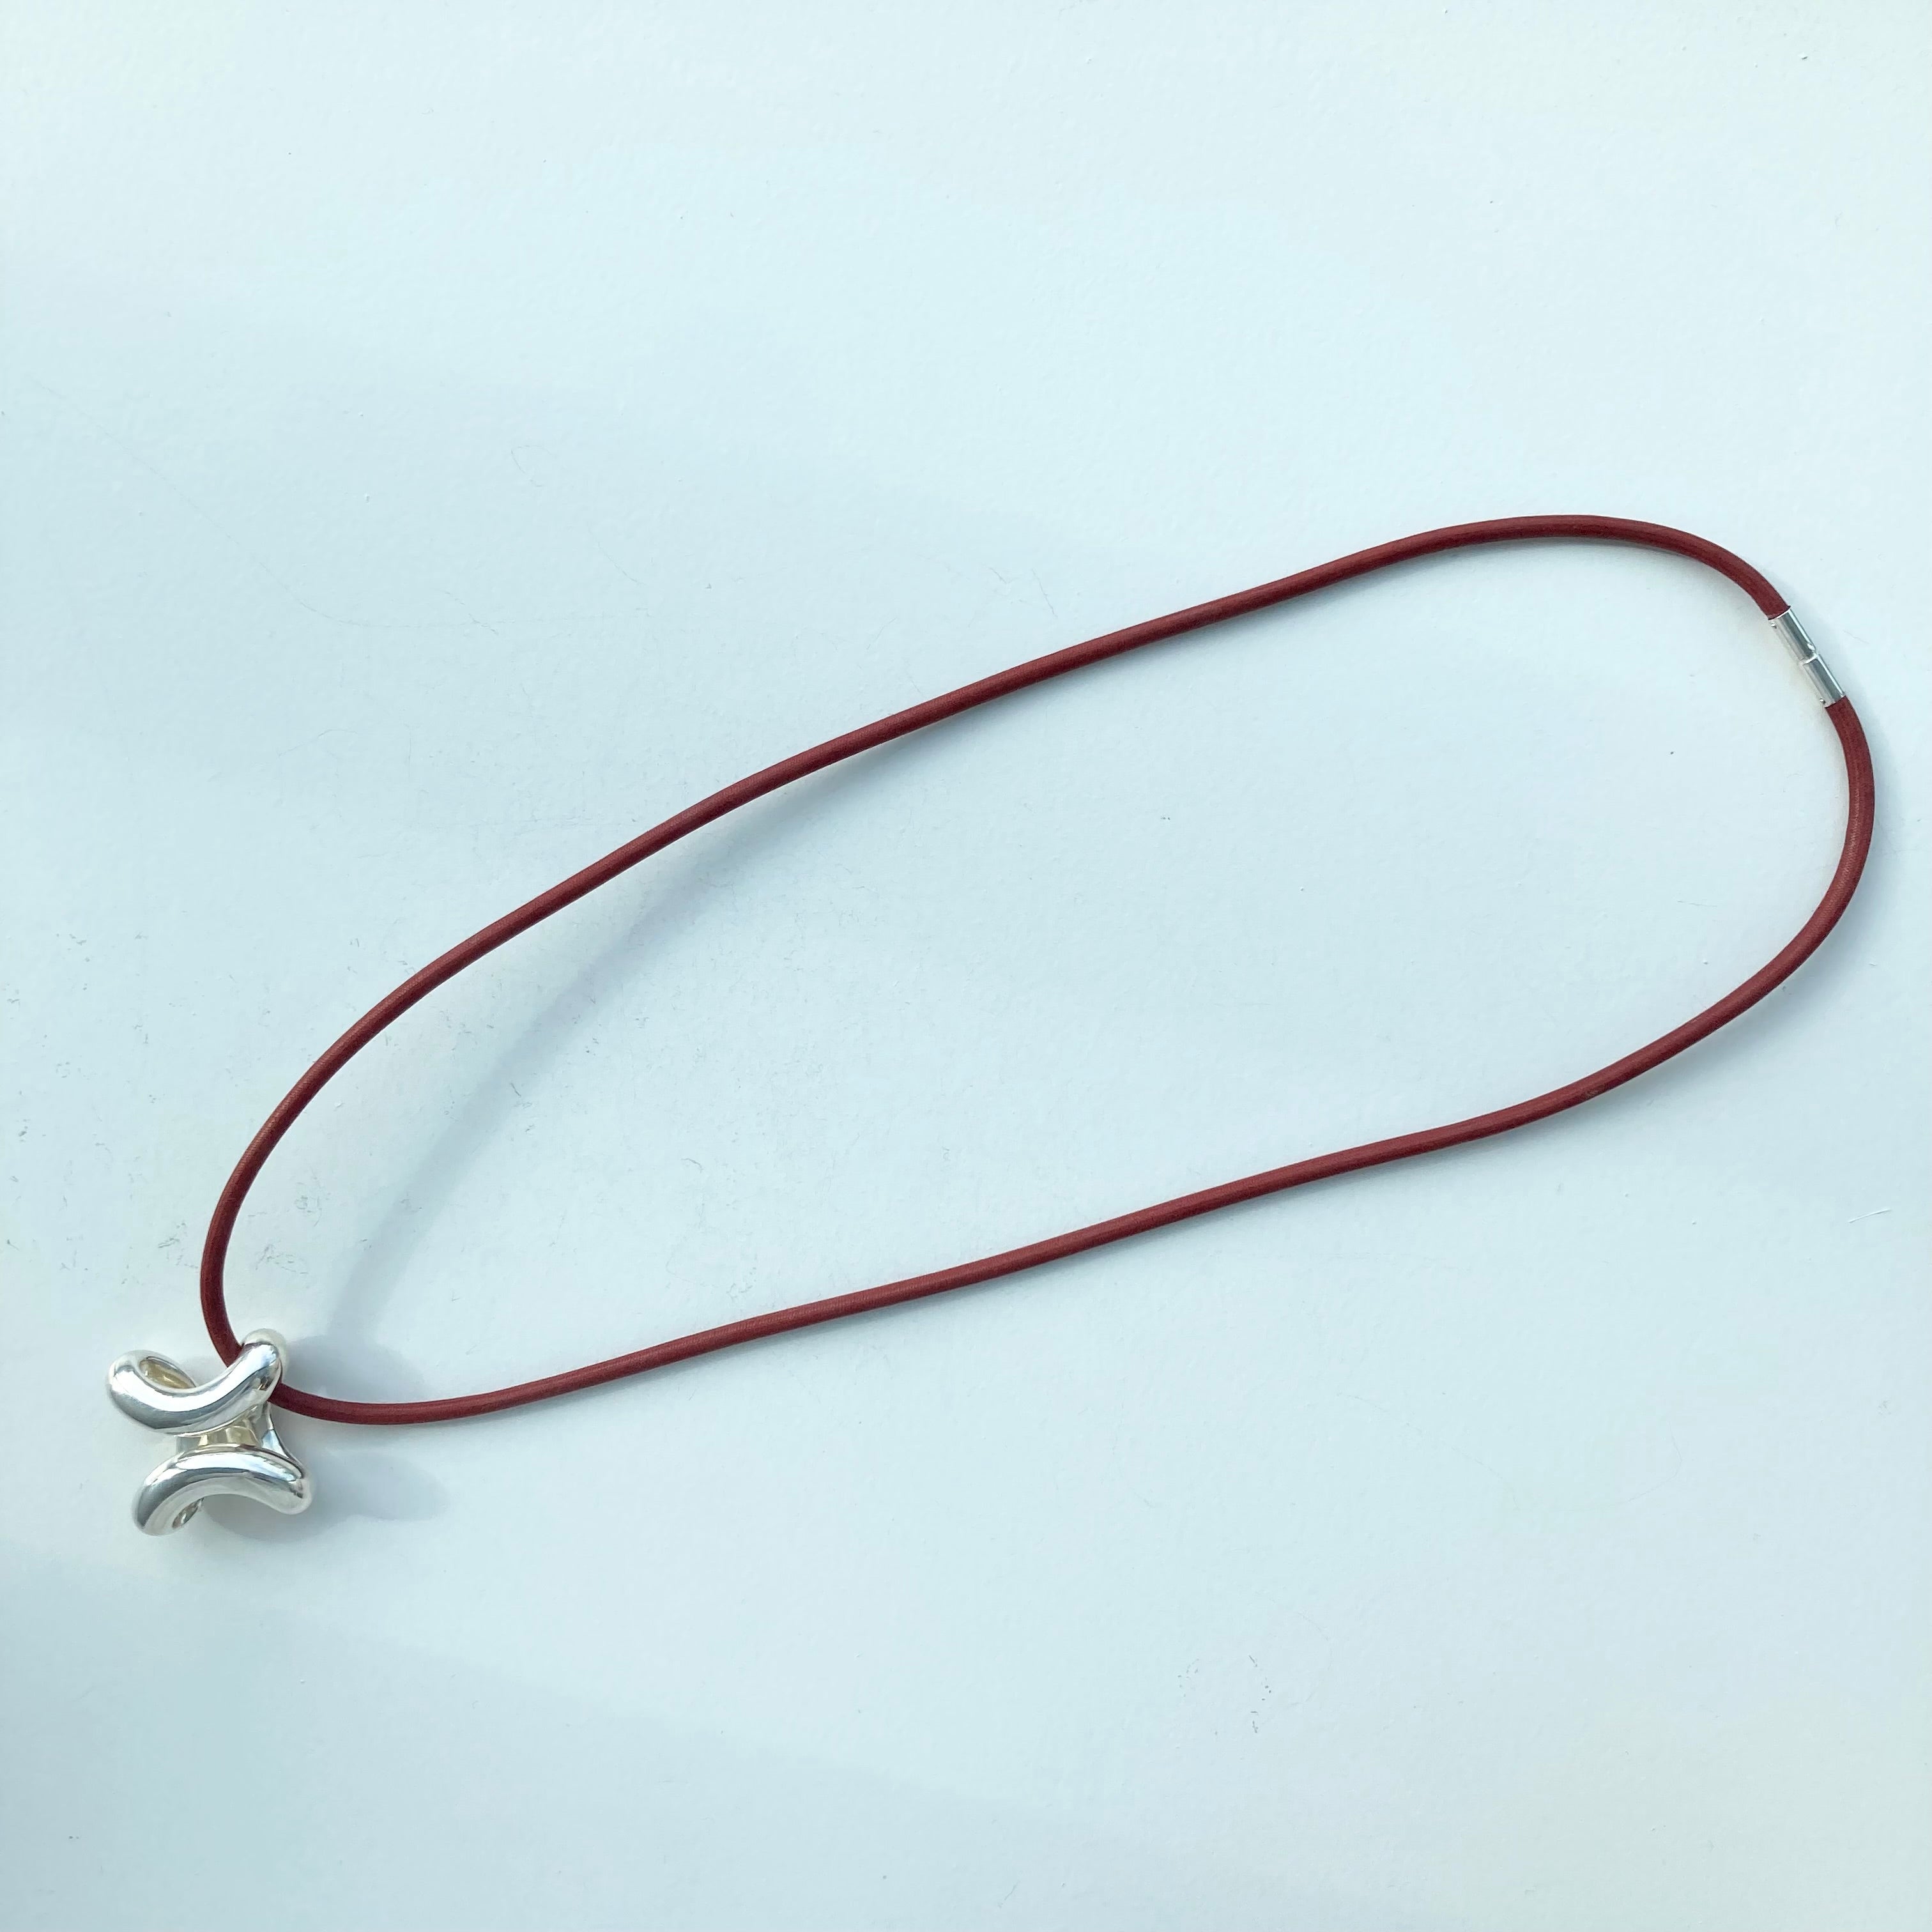 HERMES Lima necklace vintage SV925 エルメス リマ ネックレス